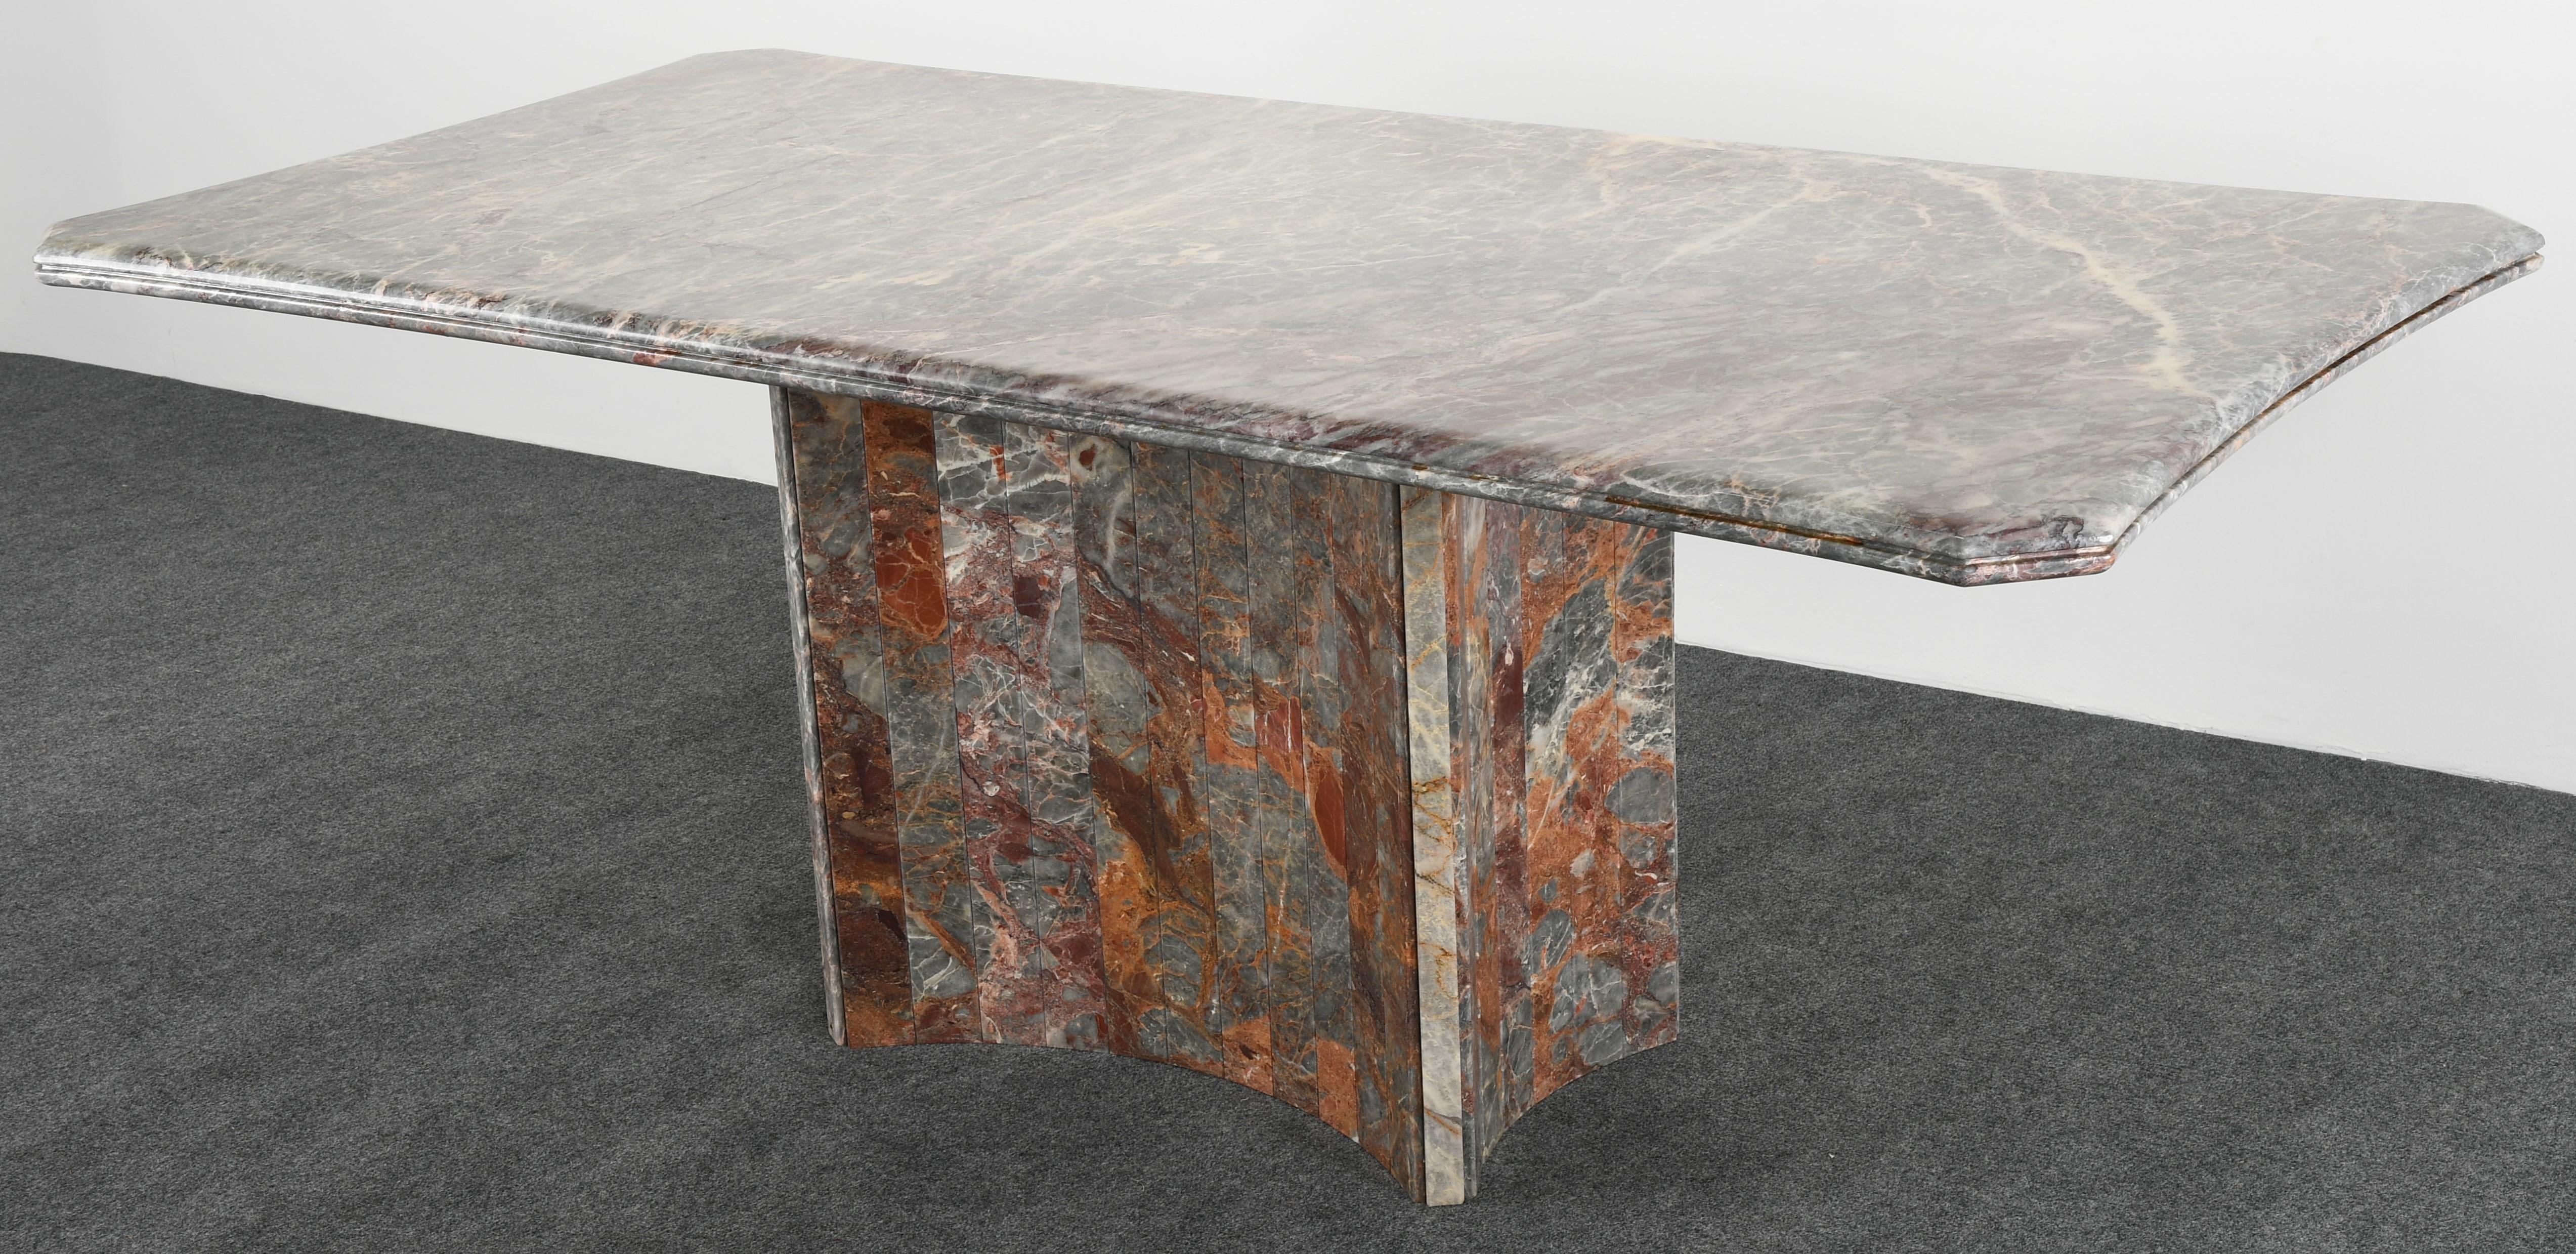 A distinctive Jasper green and Rouge Italian marble dining table by Maurice Villency. The top is solid marble with angled corners and beveled detail. The base is alternating with smaller marble panels. Labeled 